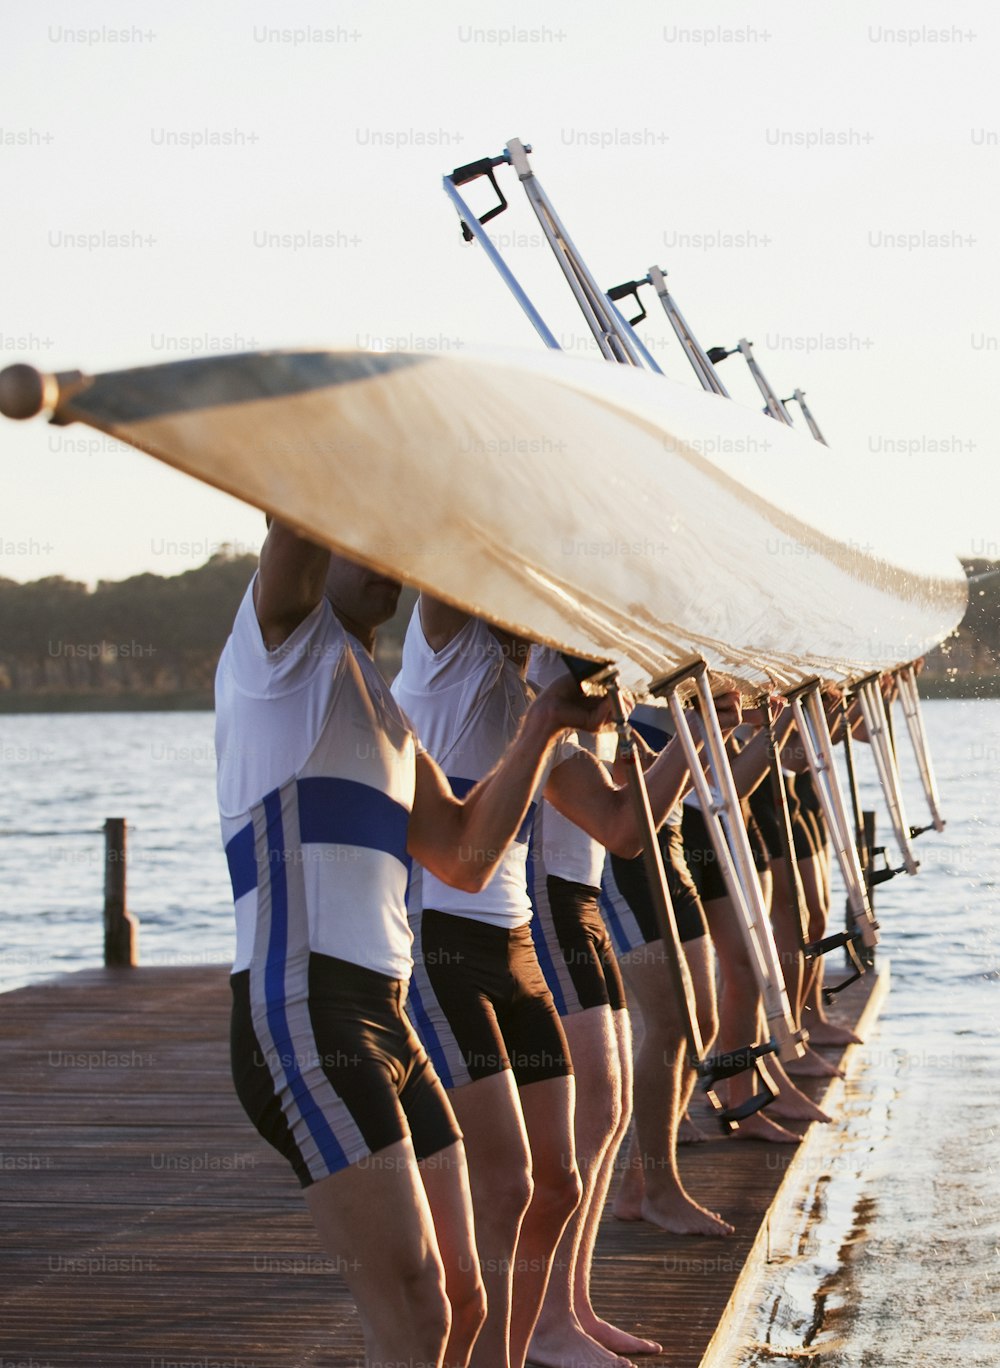 a group of people standing on a dock with a surfboard